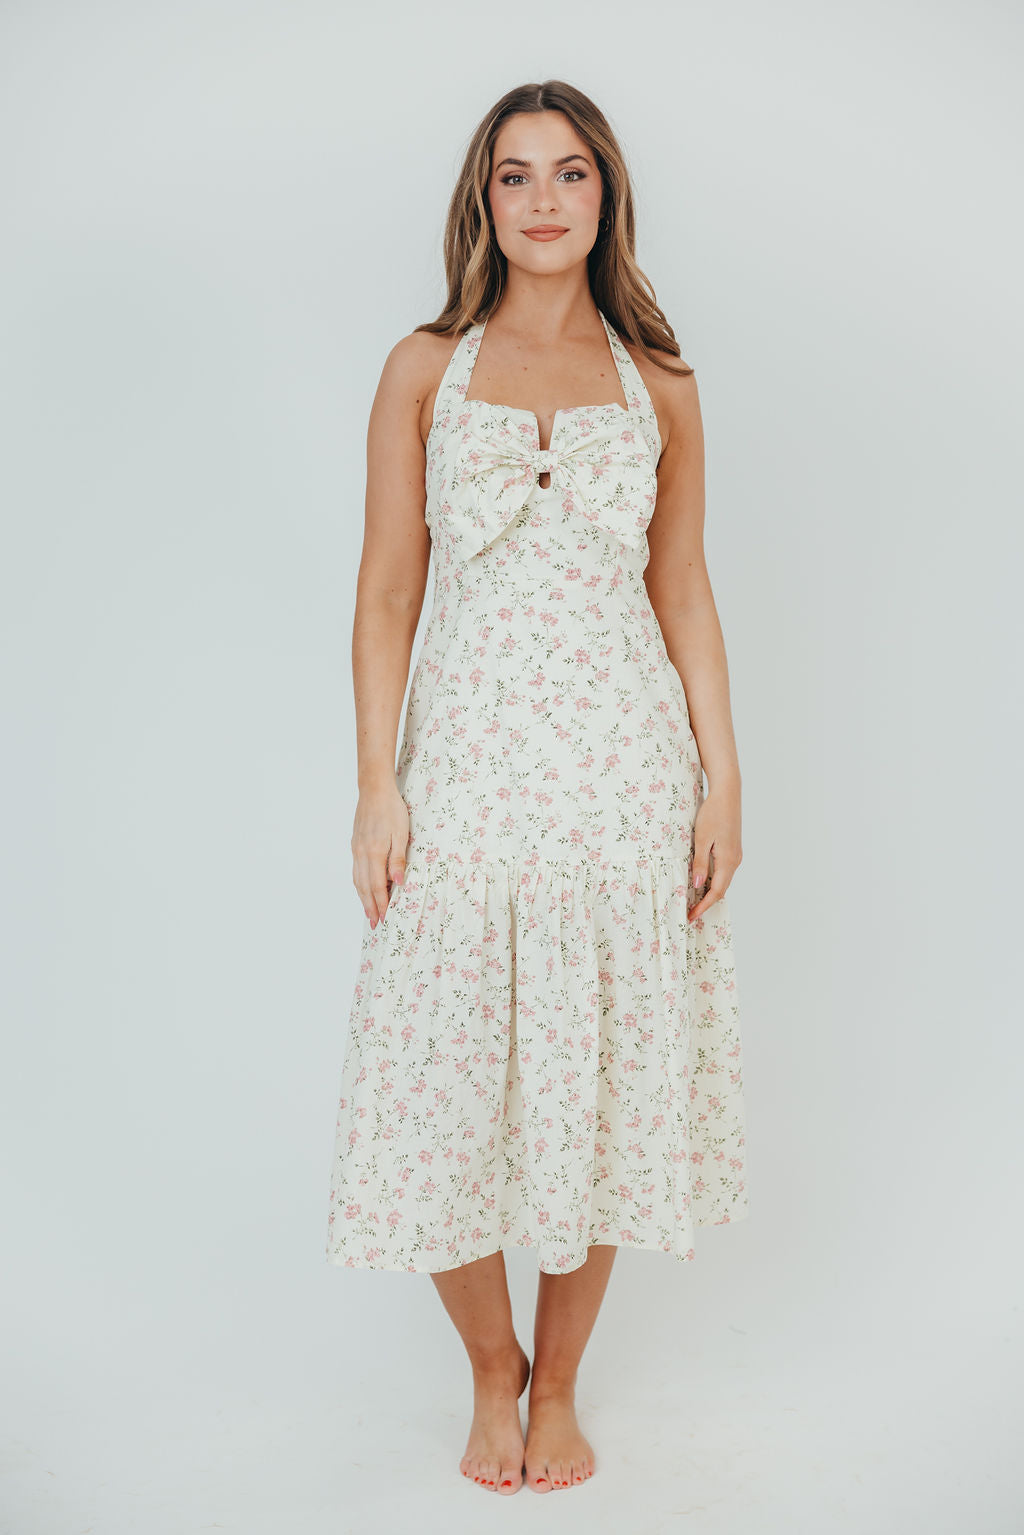 Taylor 100% Cotton Midi Dress with Bow Detail in Cream & Pink Floral